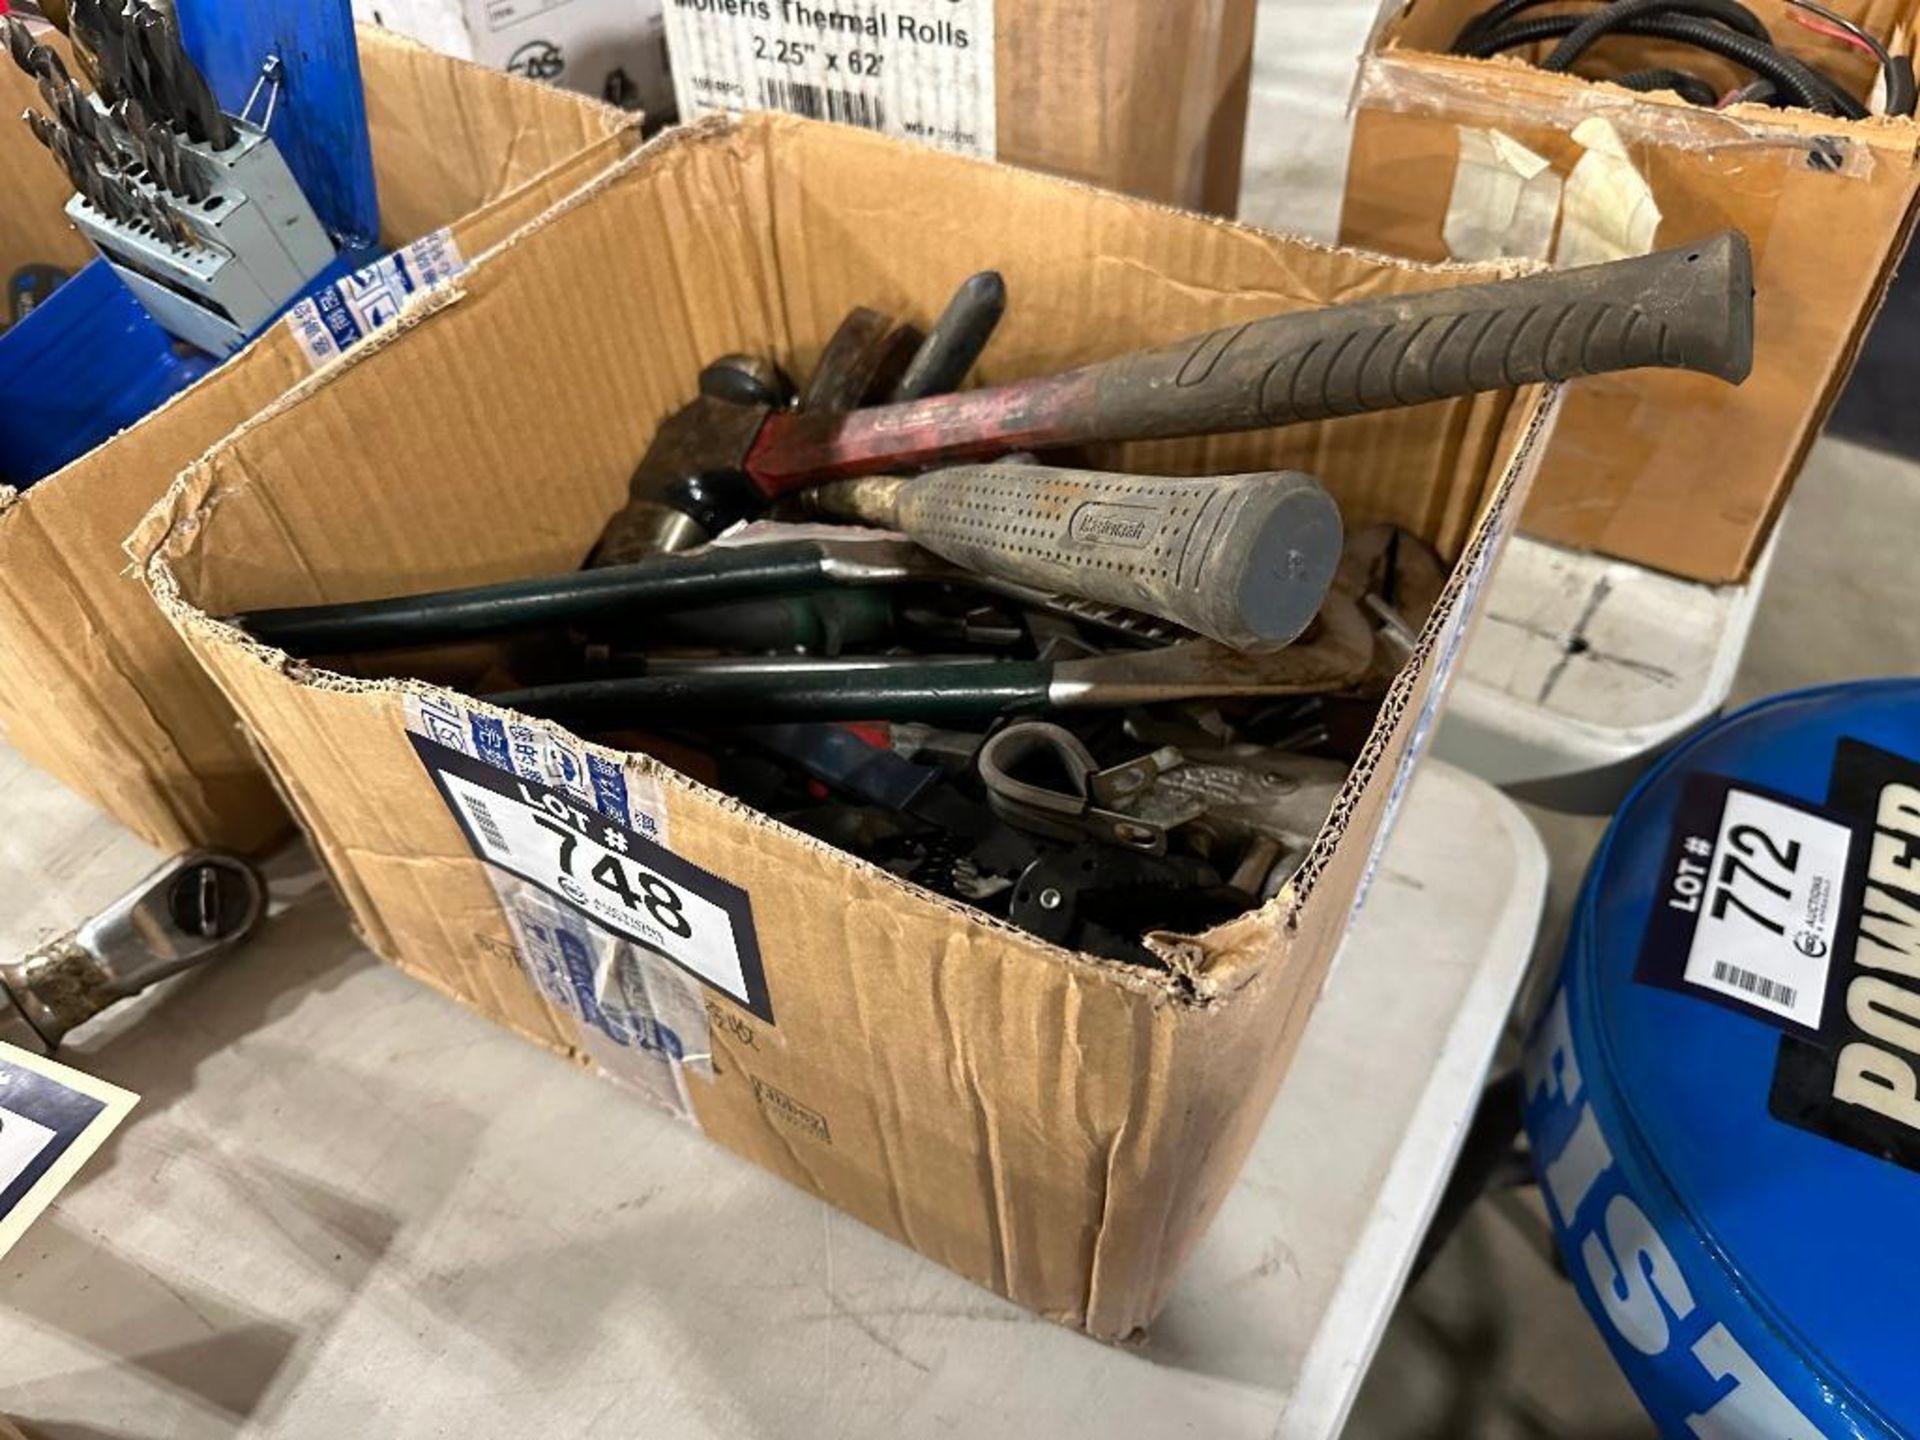 Lot of Asst. Hammers, Pliers, Wire Strippers, etc. - Image 2 of 5